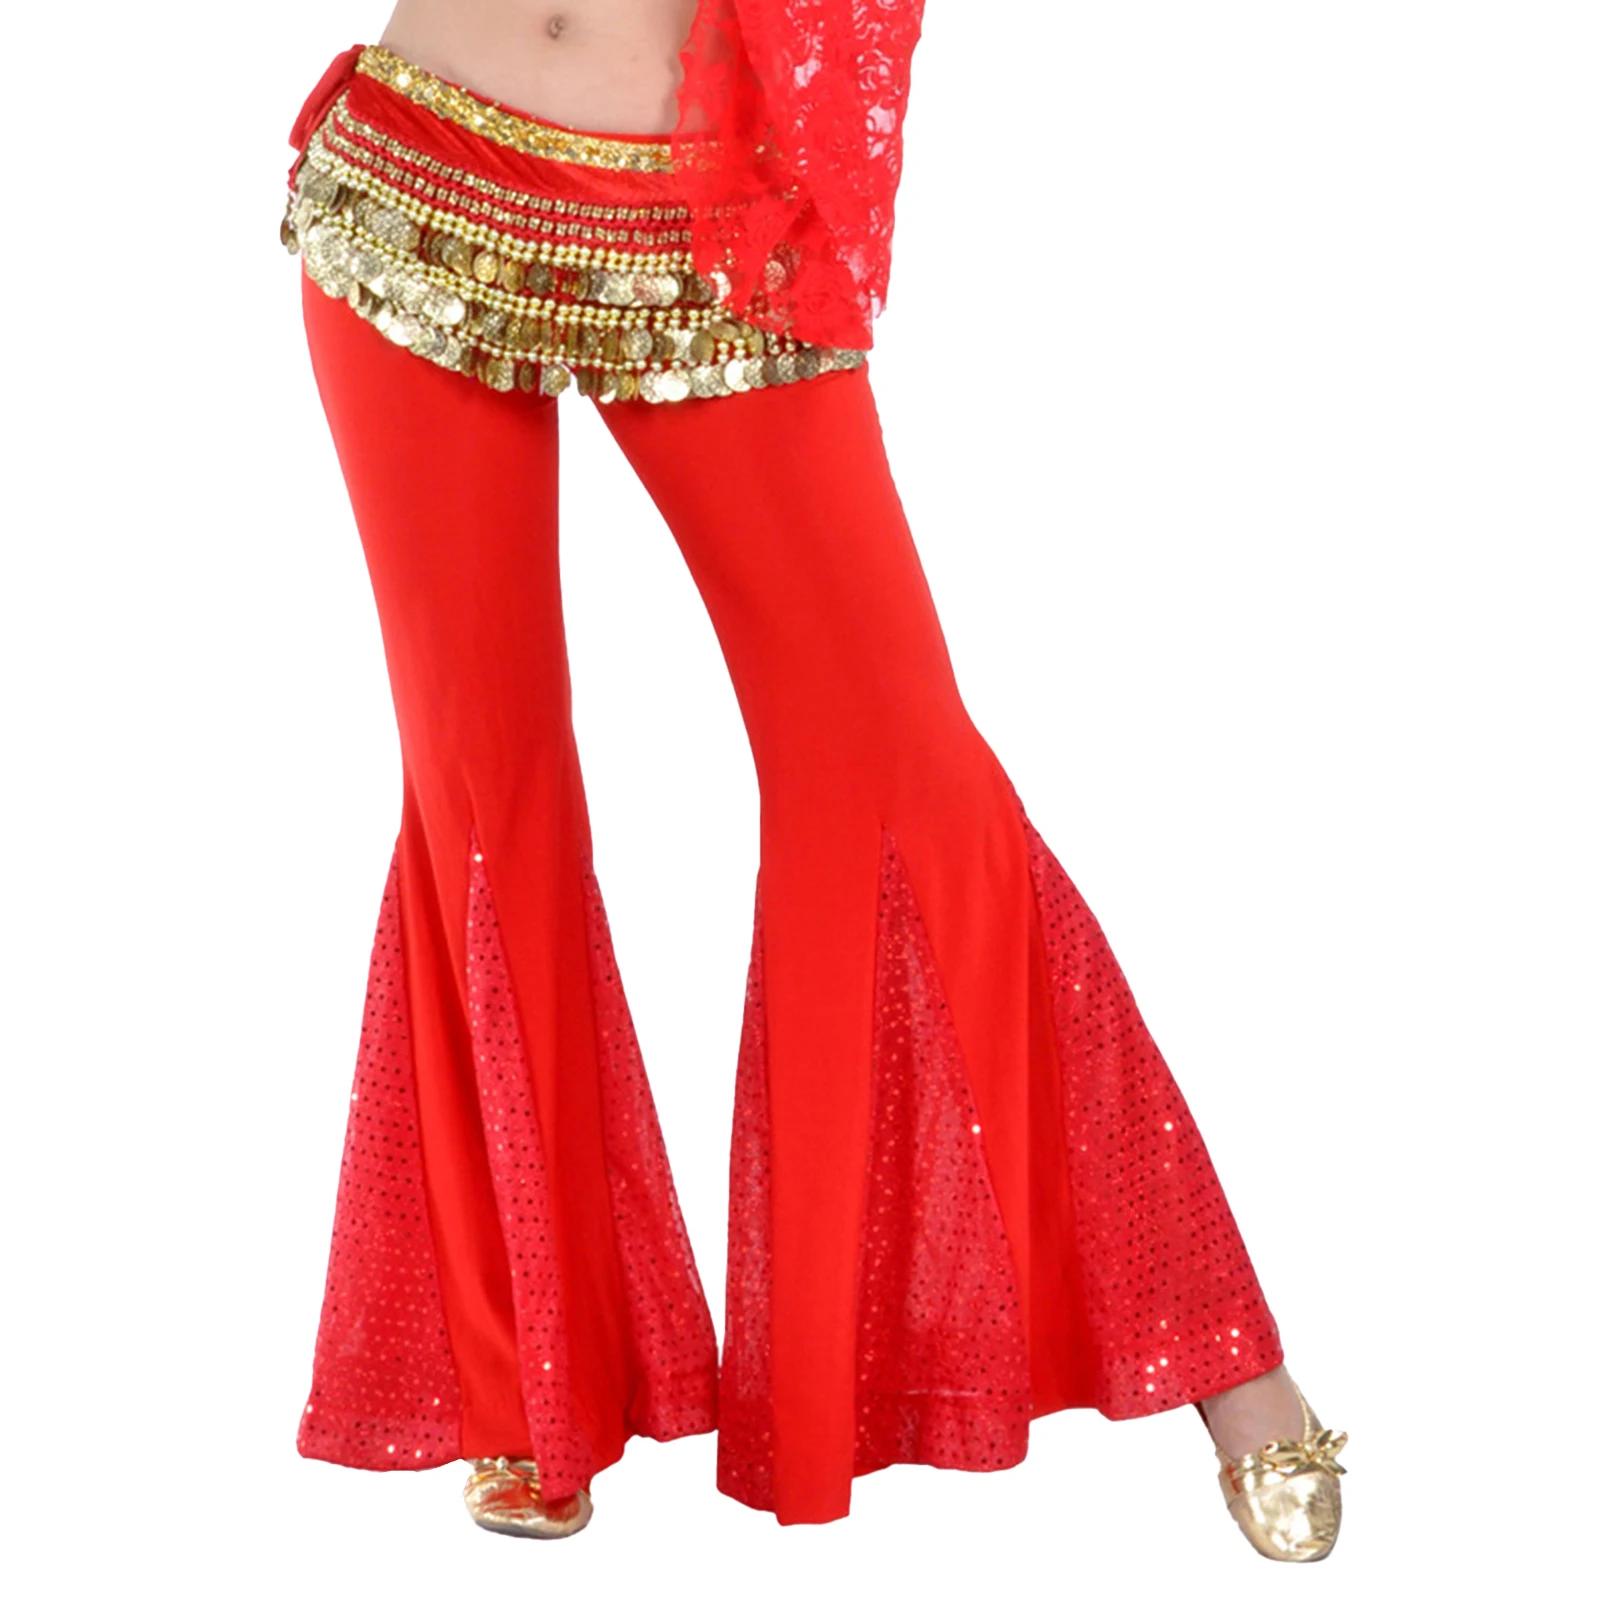 

Belly Dance Costume Indian Dance Fishtail Pants Low Rise Bell-Bottoms Flared Trousers Women Dance Clothes Bellydance Wear